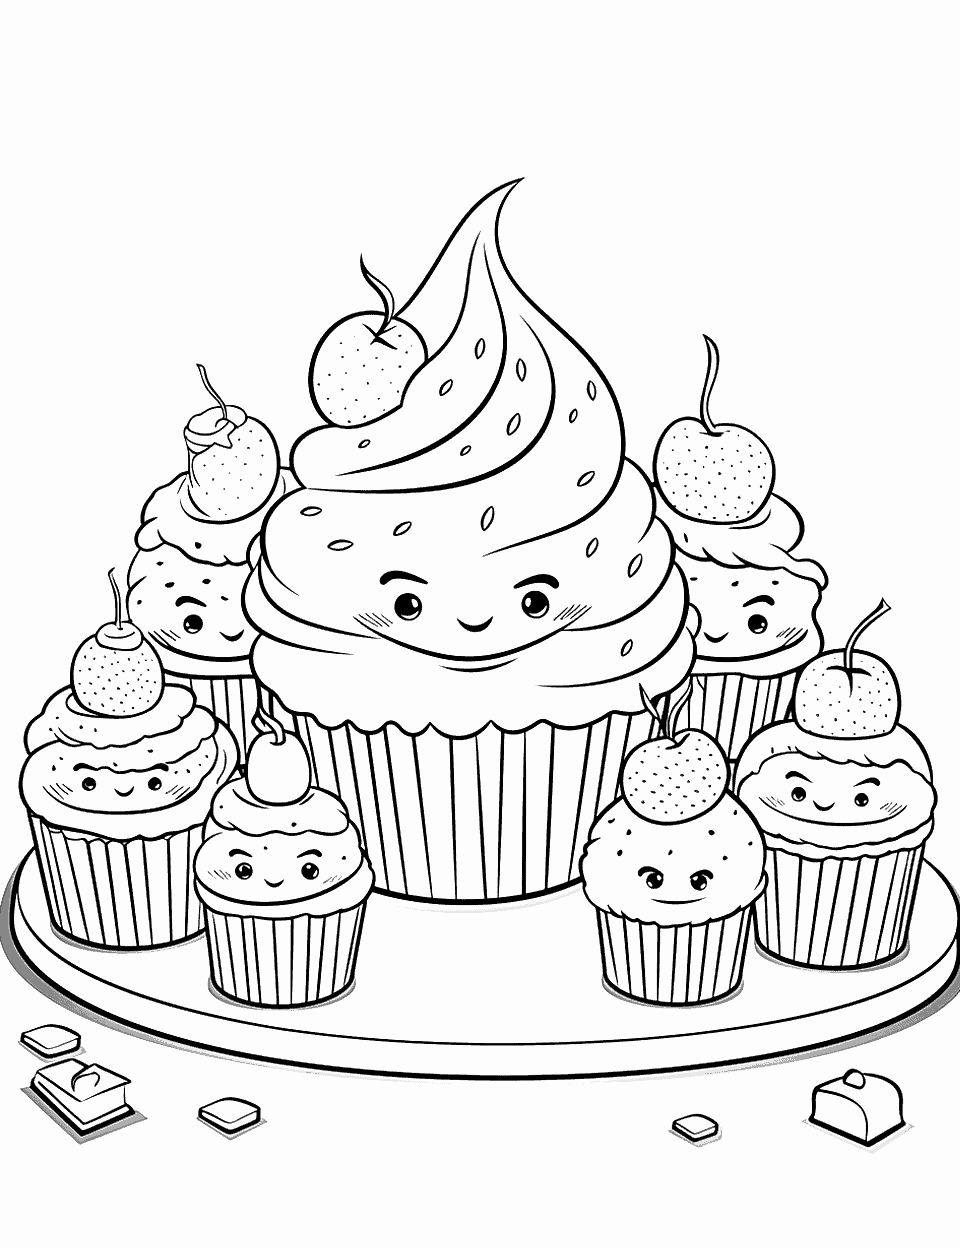 Kawaii Cupcake Party Coloring Page - A table filled with kawaii-style cupcakes decorated with rainbow sprinkles.